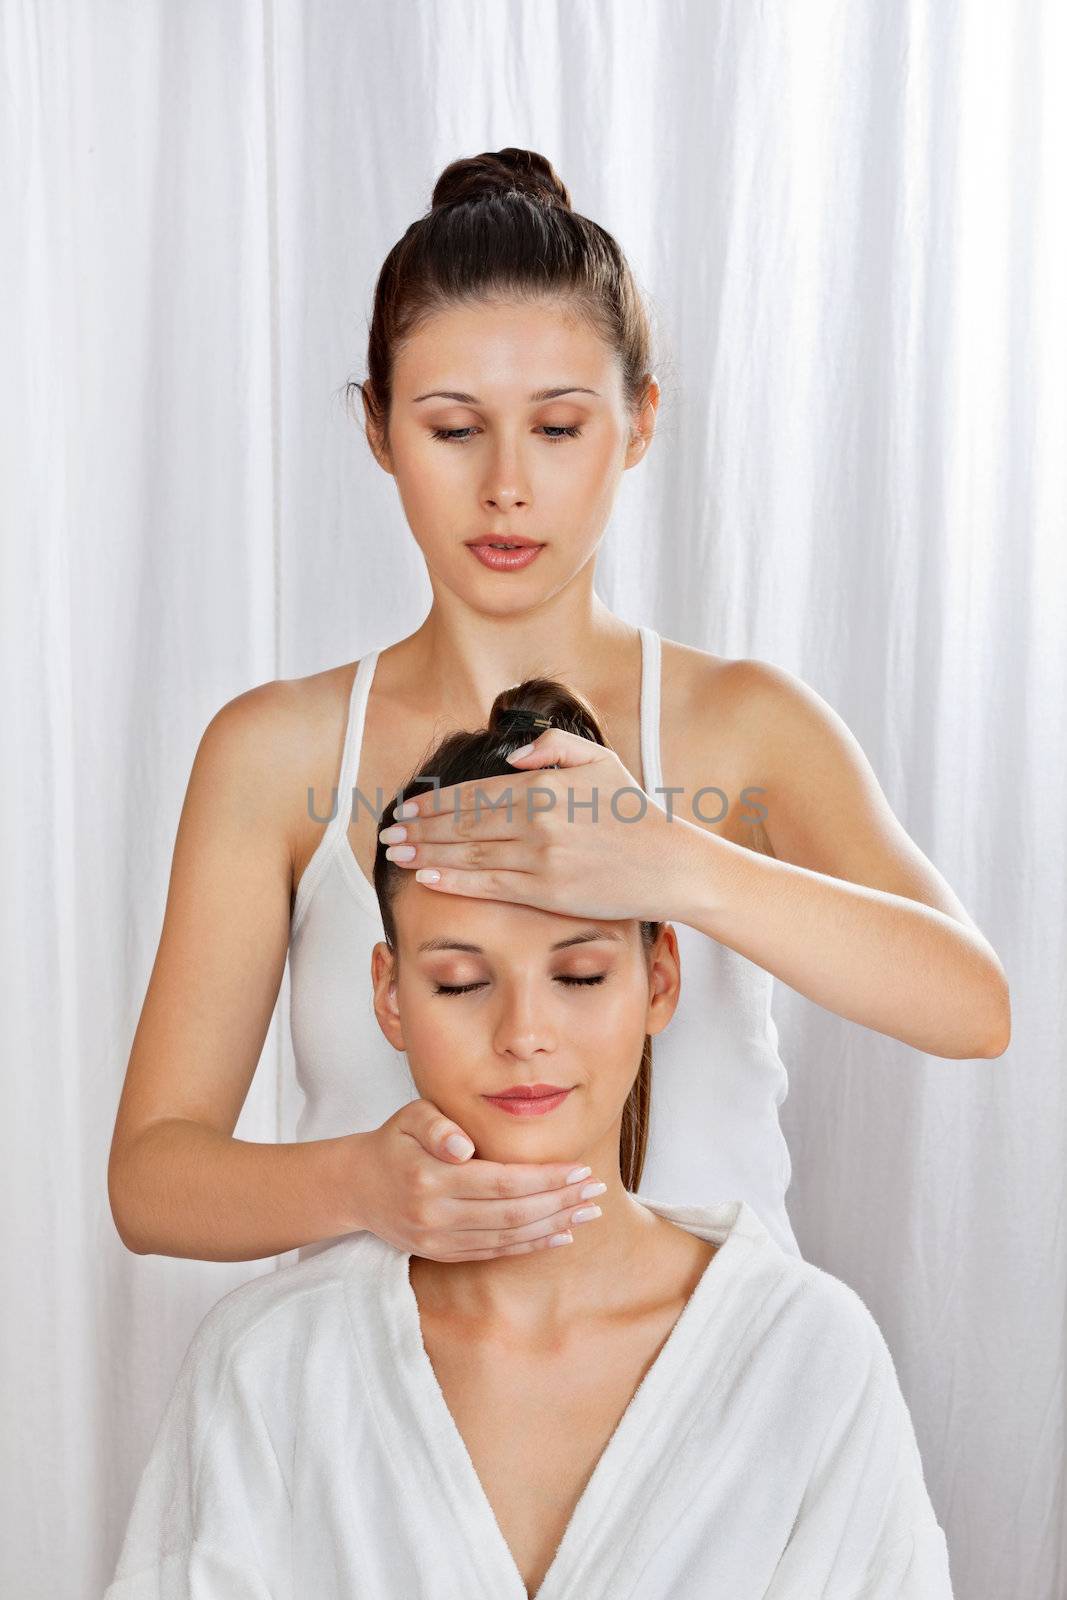 Female masseuse giving a head massage to woman at health spa